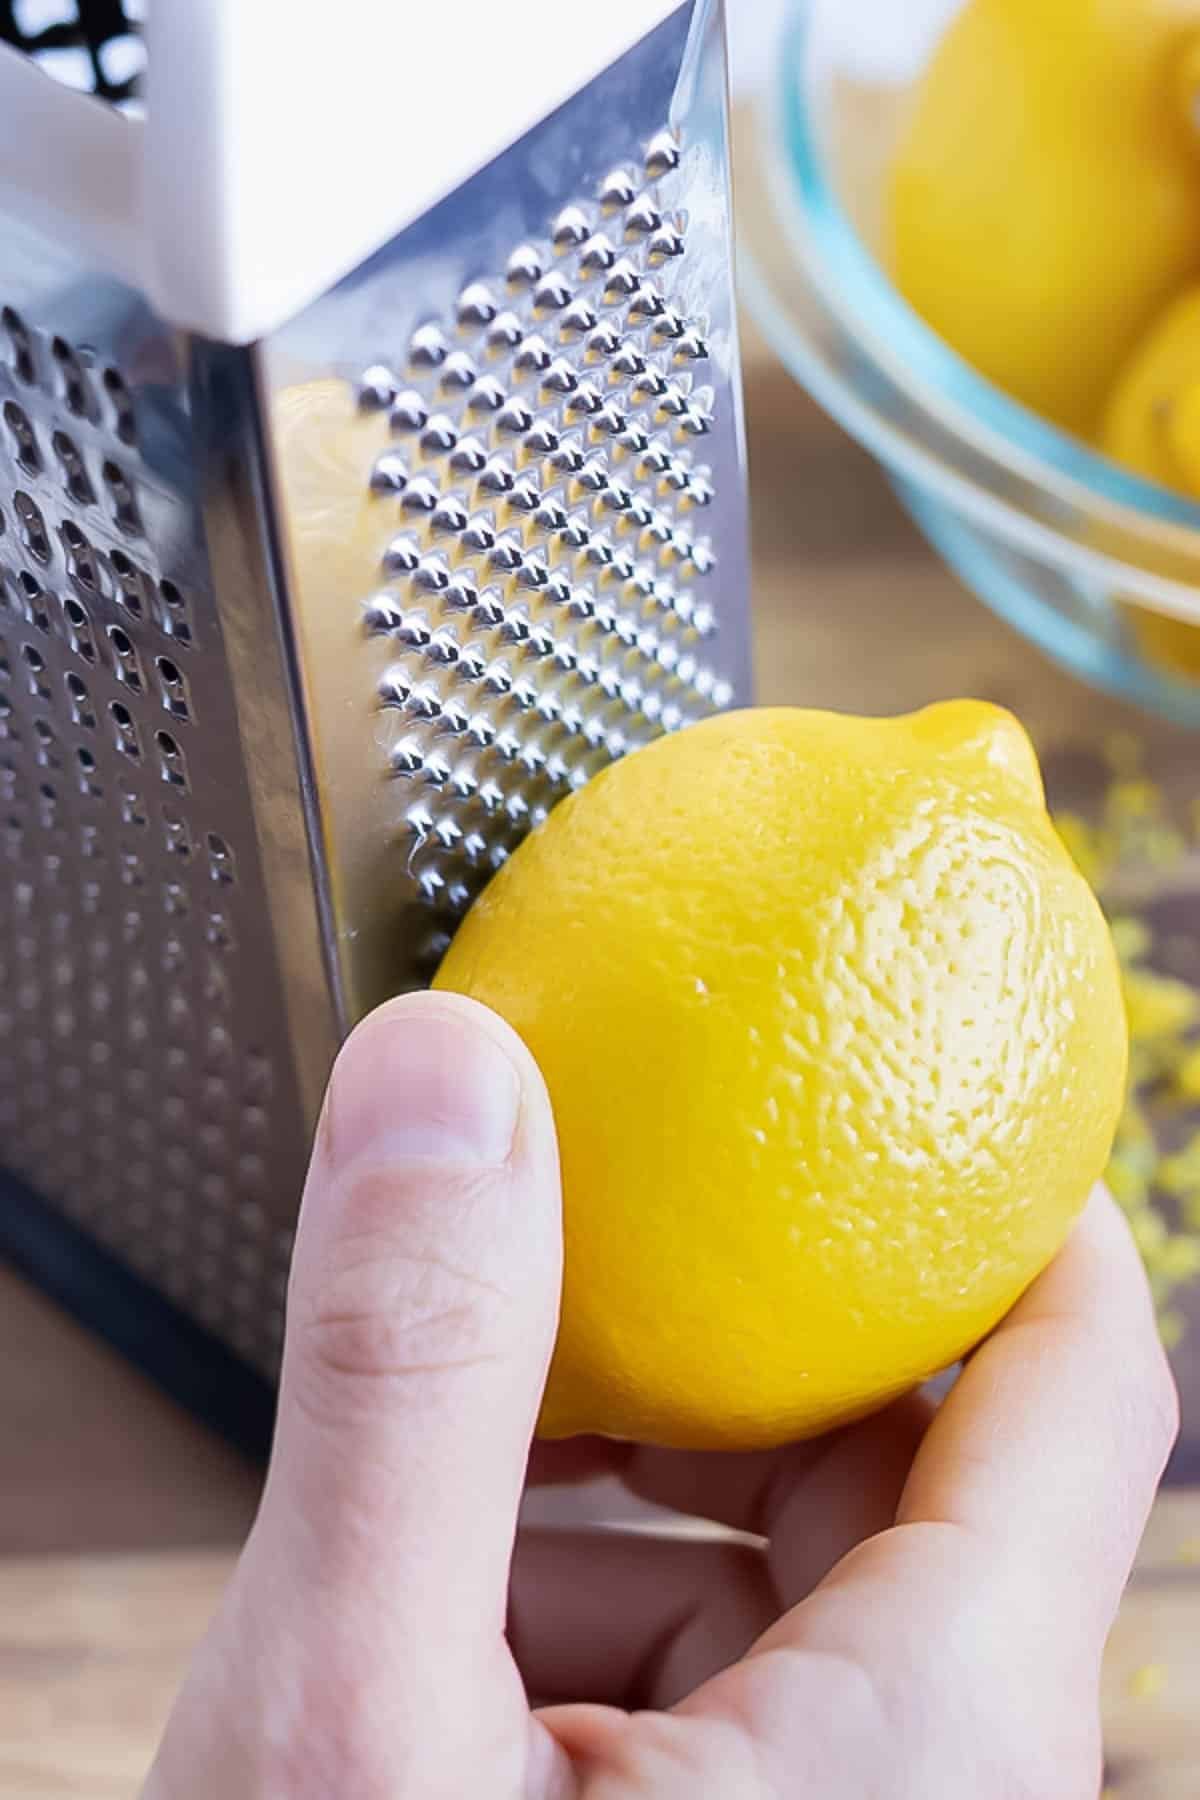 Demonstrating how to use a boxed cheese grater to zest a lemon.